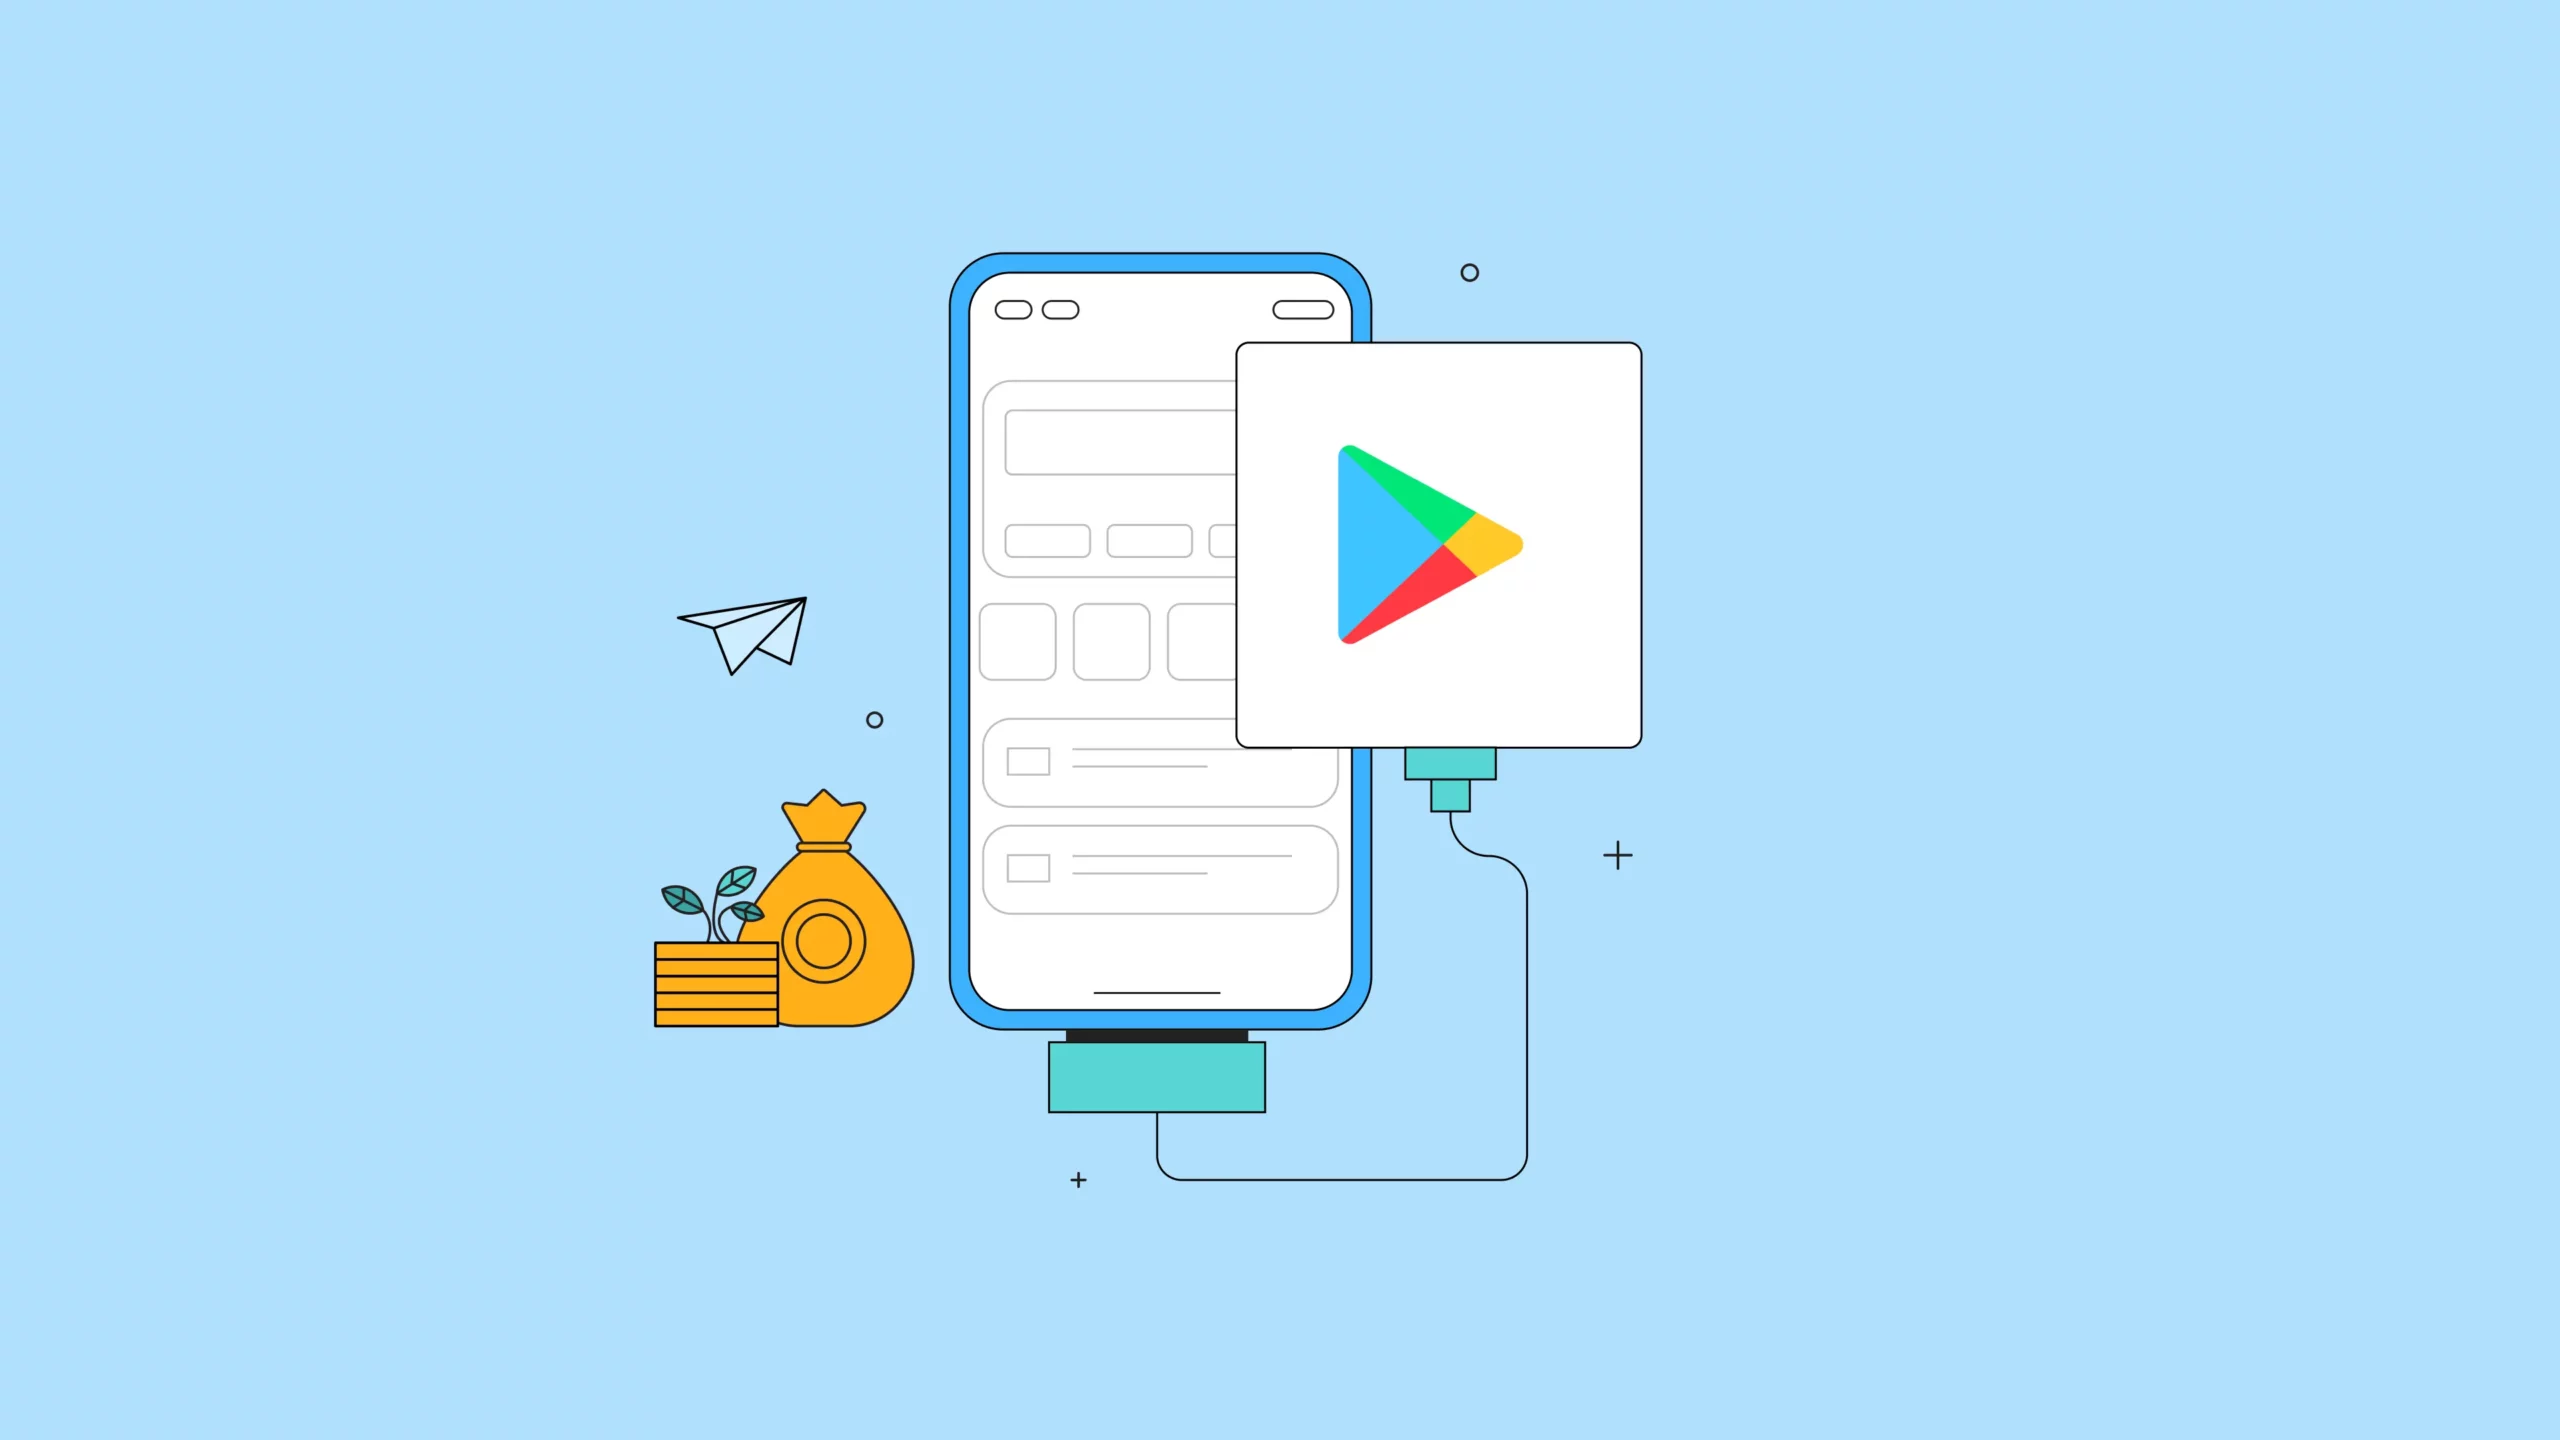 Requirements for publishing your Nigerian loan apps into the Google Play Store